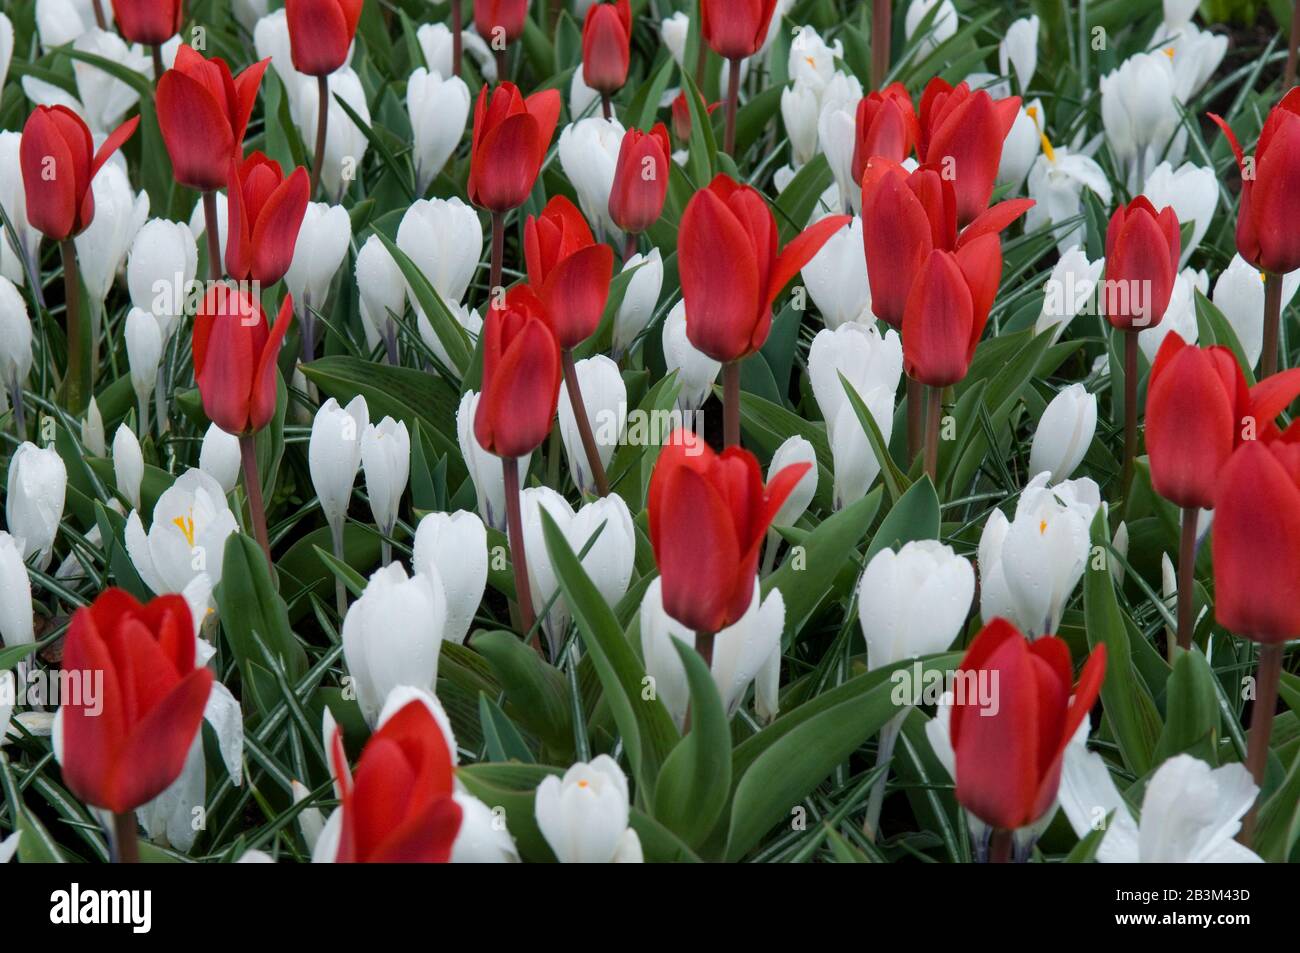 This is mosaic of red tulips and white crocuses. Such disign is characteristic for Holland parks. Stock Photo